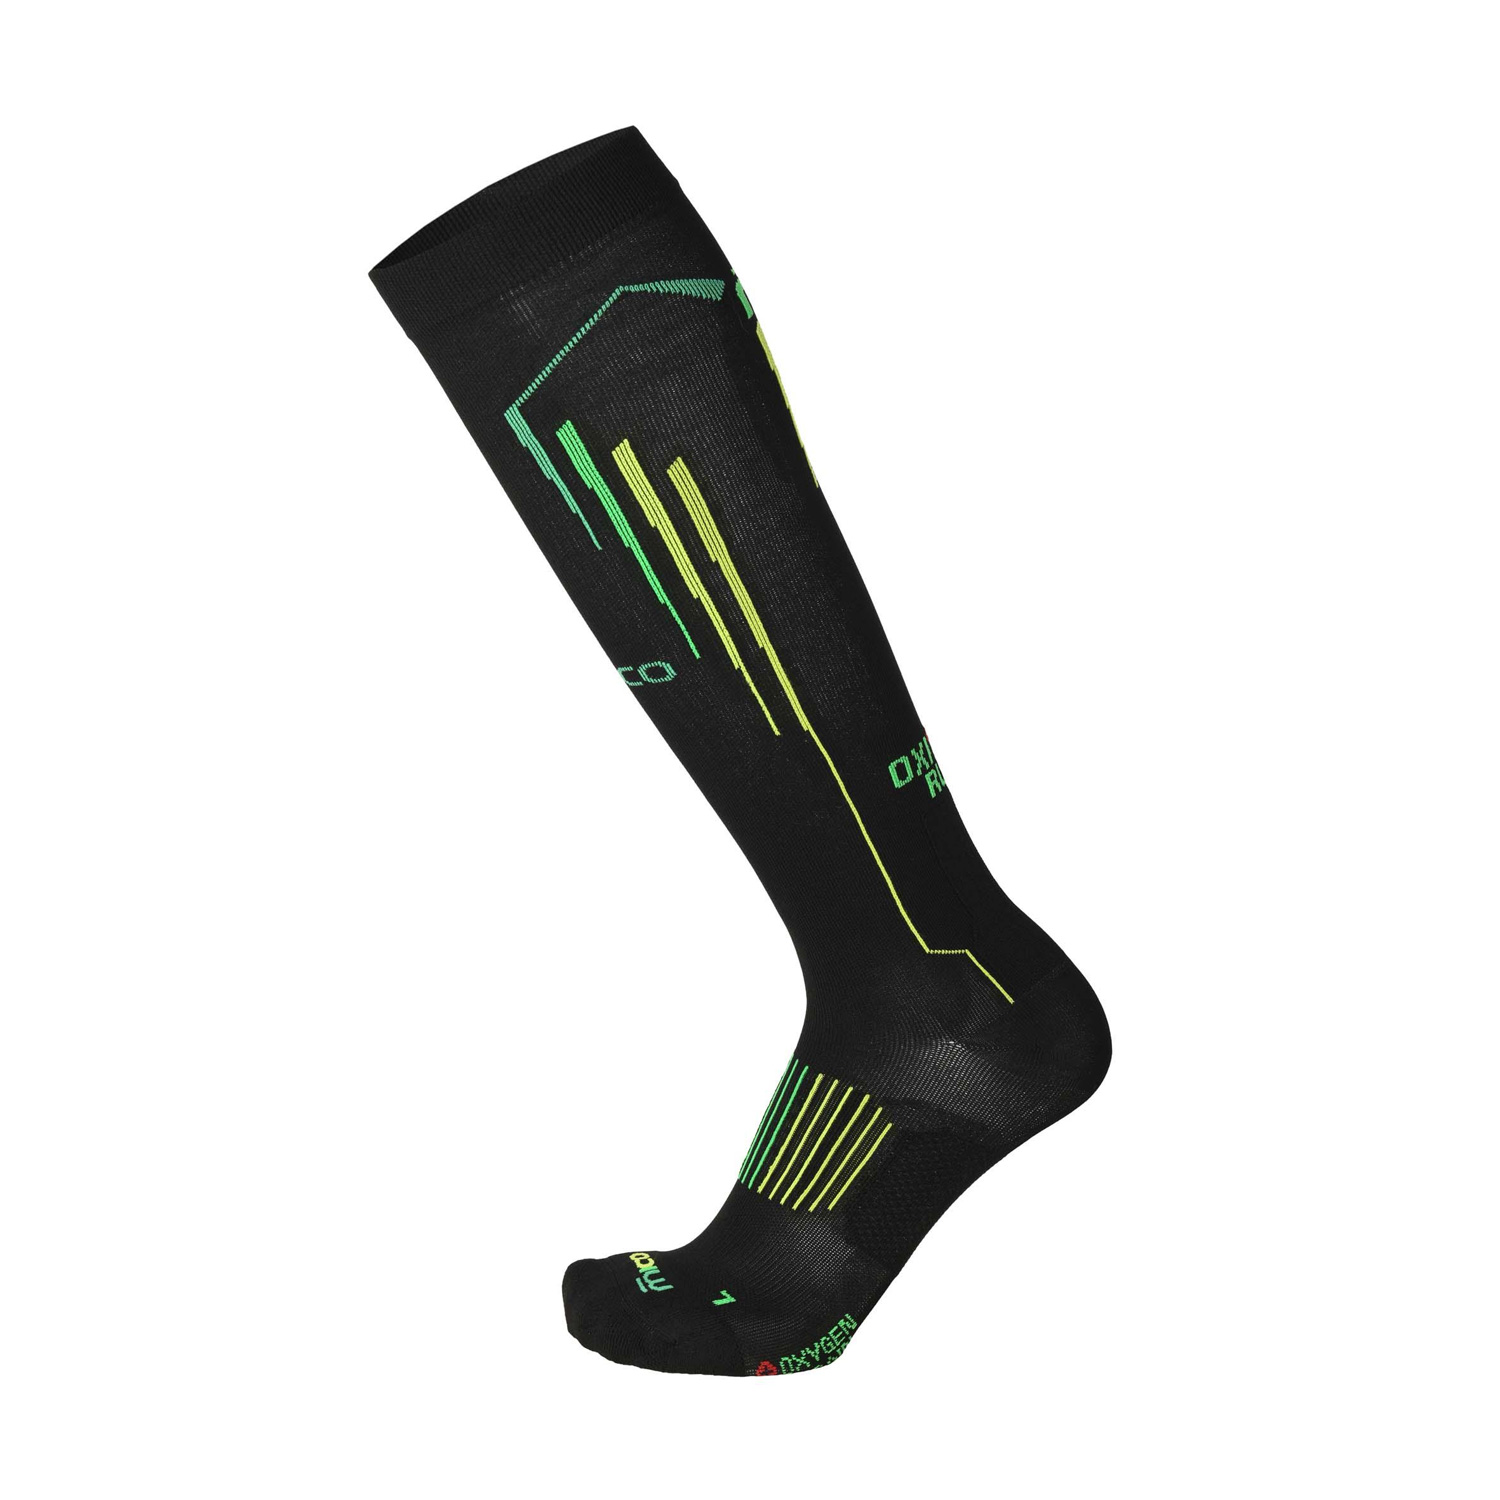 Mico Compression Oxi-Jet Light Weight Calze - Nero/Verde Fluo